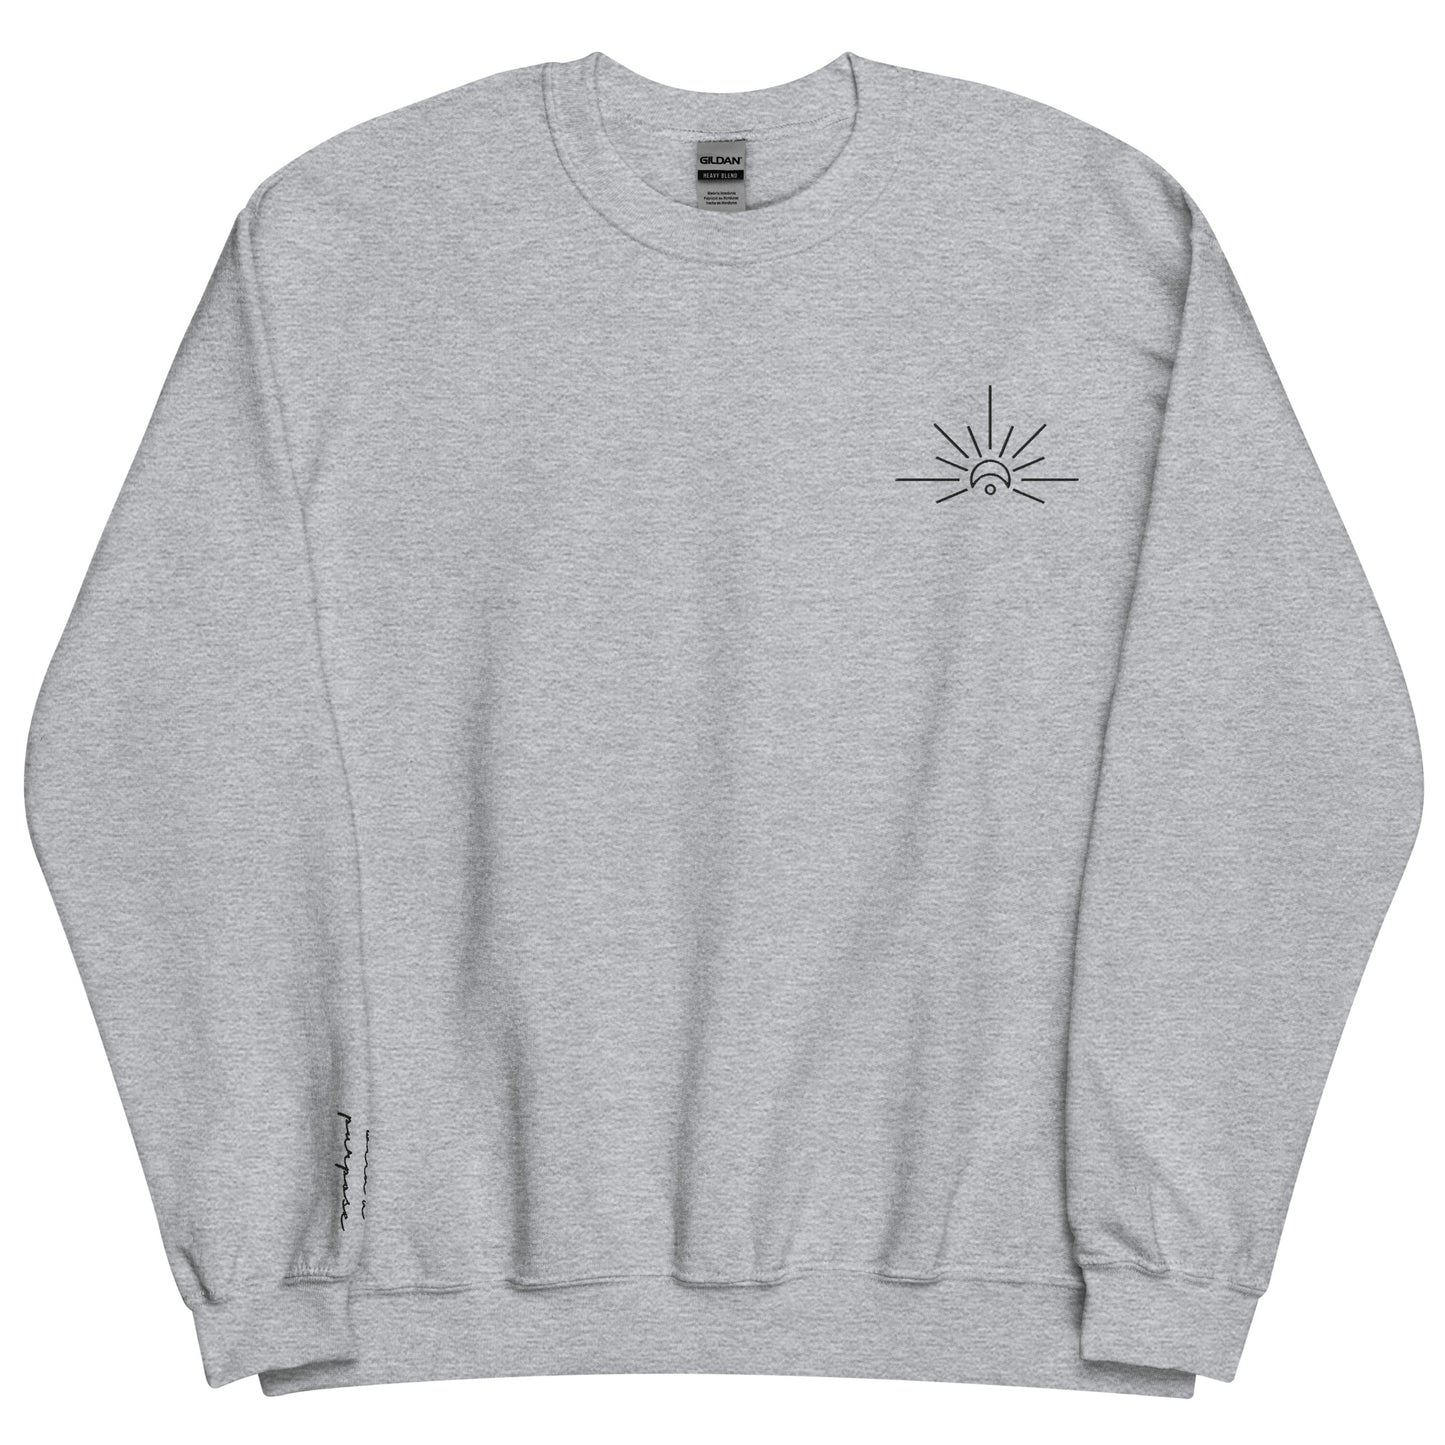 Created with a Purpose Hand-Embroidered Crew